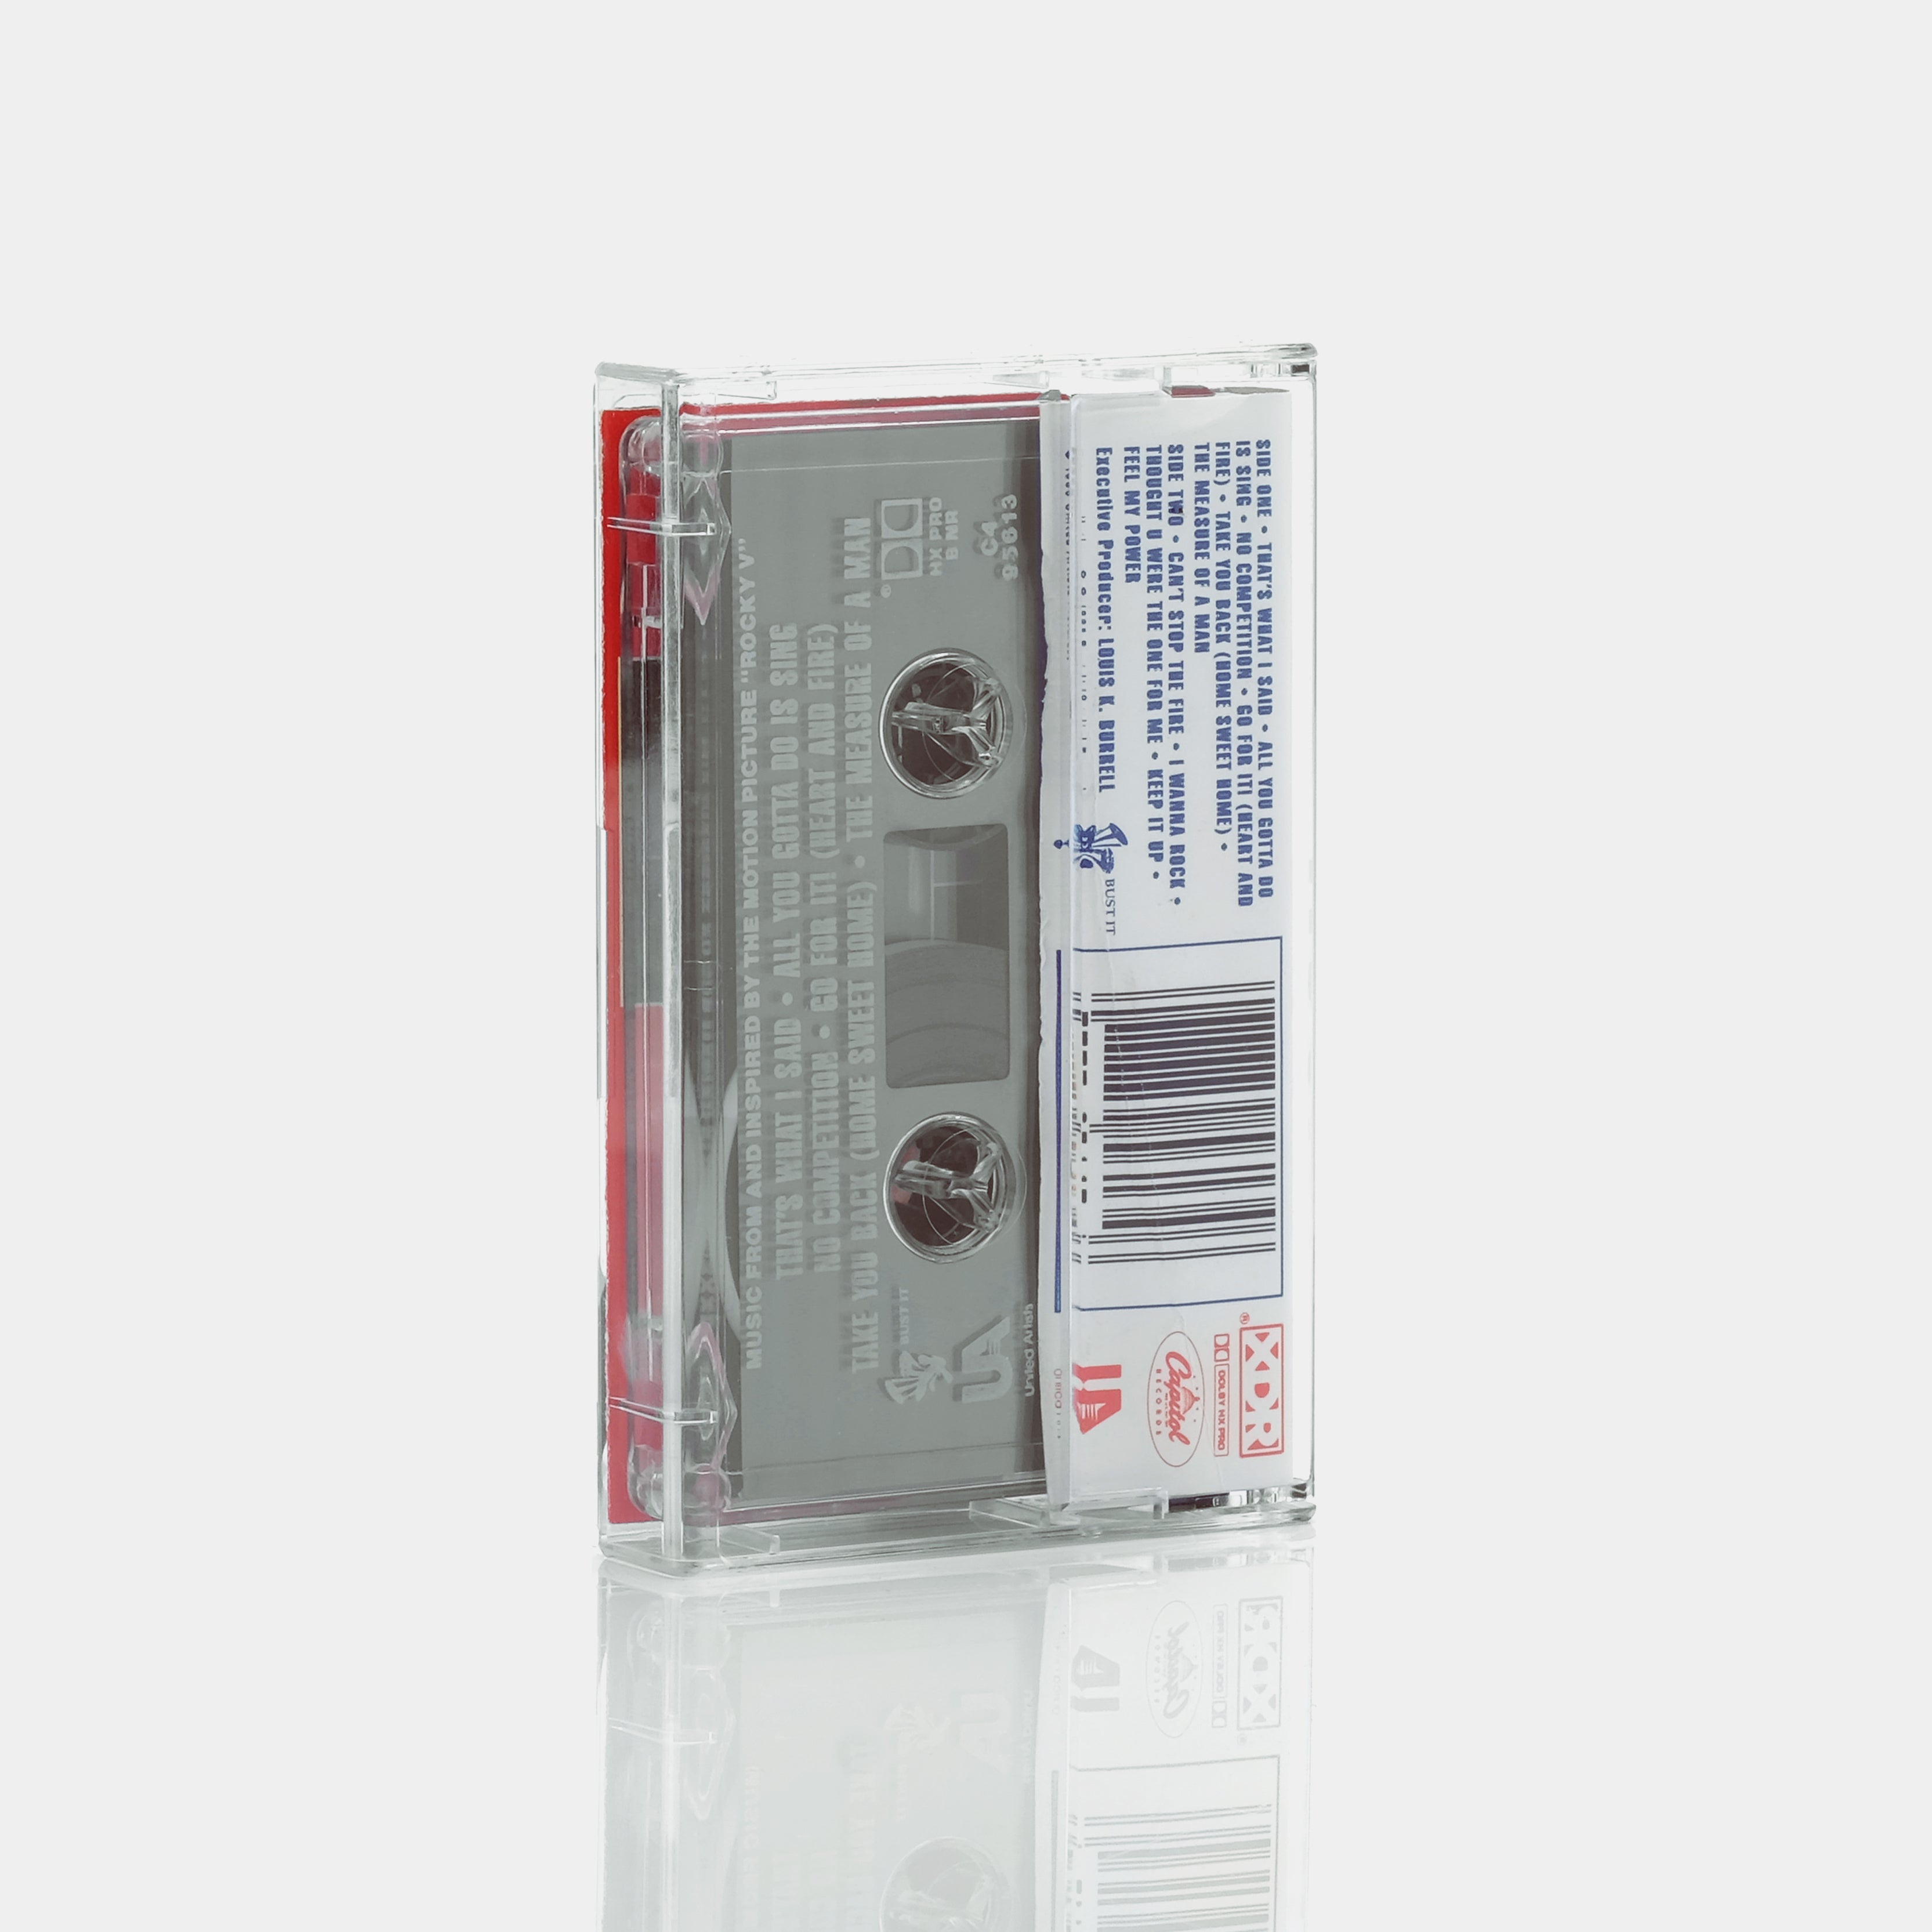 Rocky V (Music From And Inspired By The Motion Picture) Cassette Tape